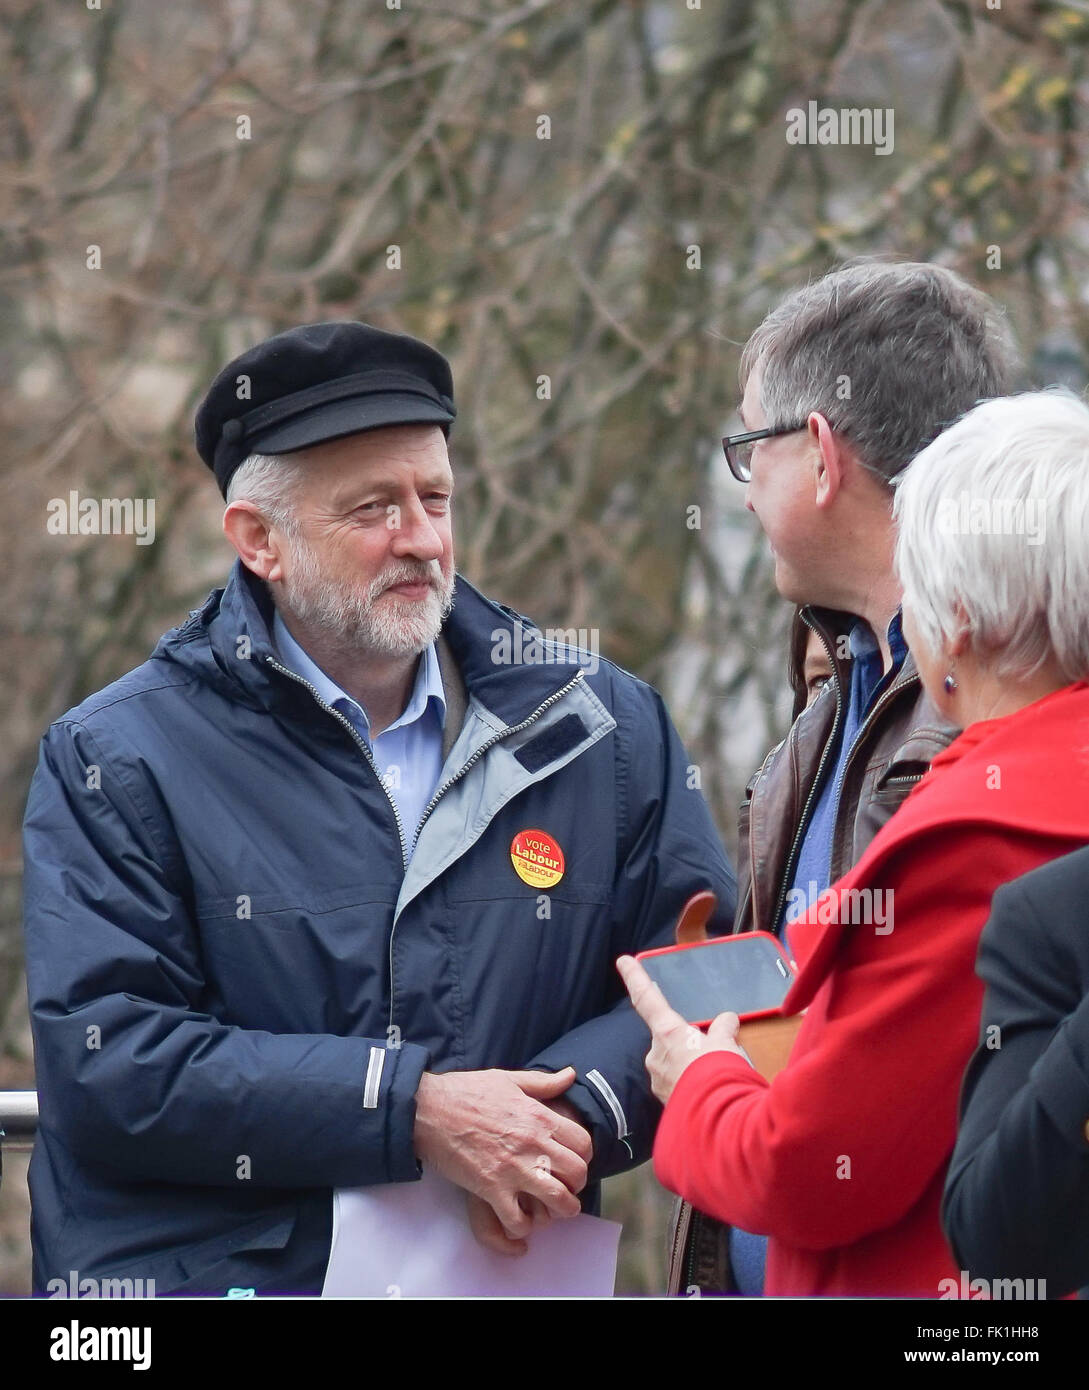 Cardiff Wales United Kingdom 5th March 2016 Anti Union Bill Protest Rally arranged by Welsh Trade Unions with Guest Speaker Jeremy Corbyn. Credit:  Sian Pearce Gordon/Alamy Live News Stock Photo